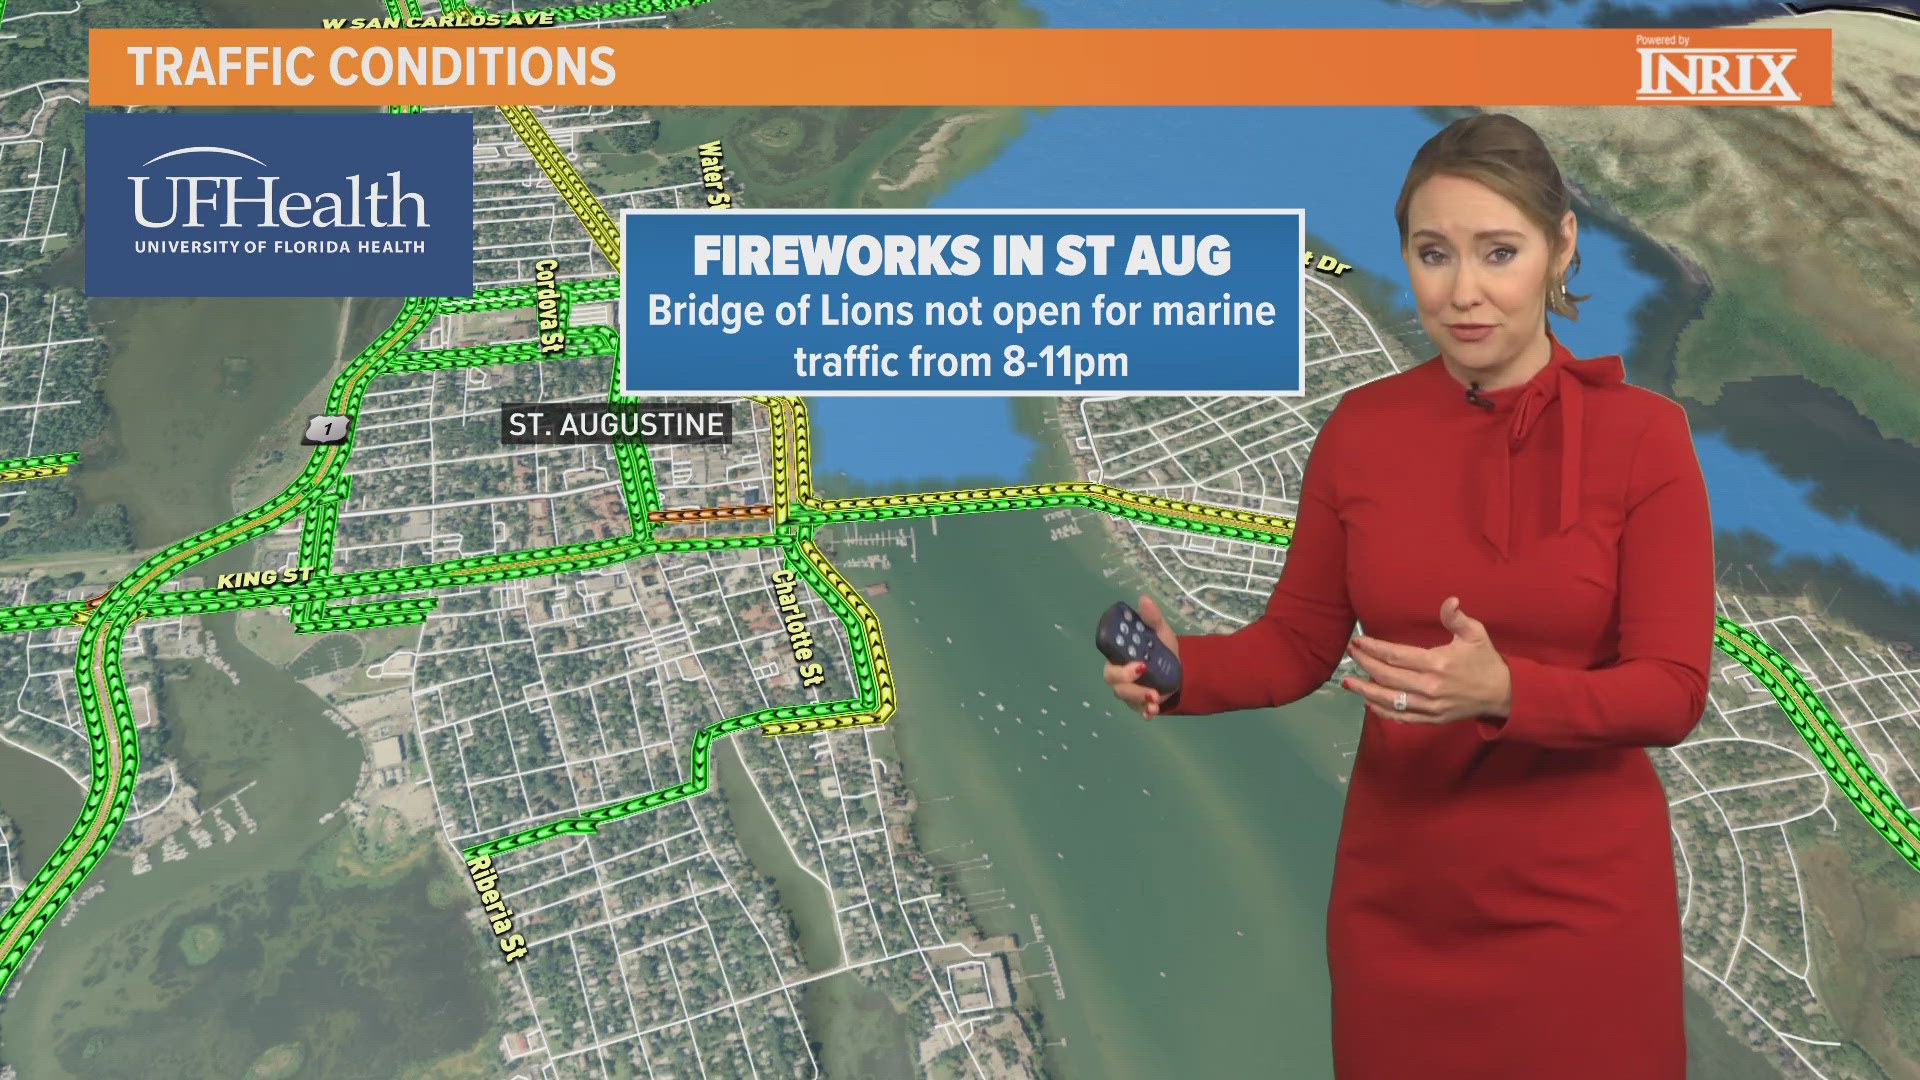 Parking in city-owned lots and on street spaces will be free during St. Augustine's 'Fireworks Over the Matanzas' Fourth of July celebration.